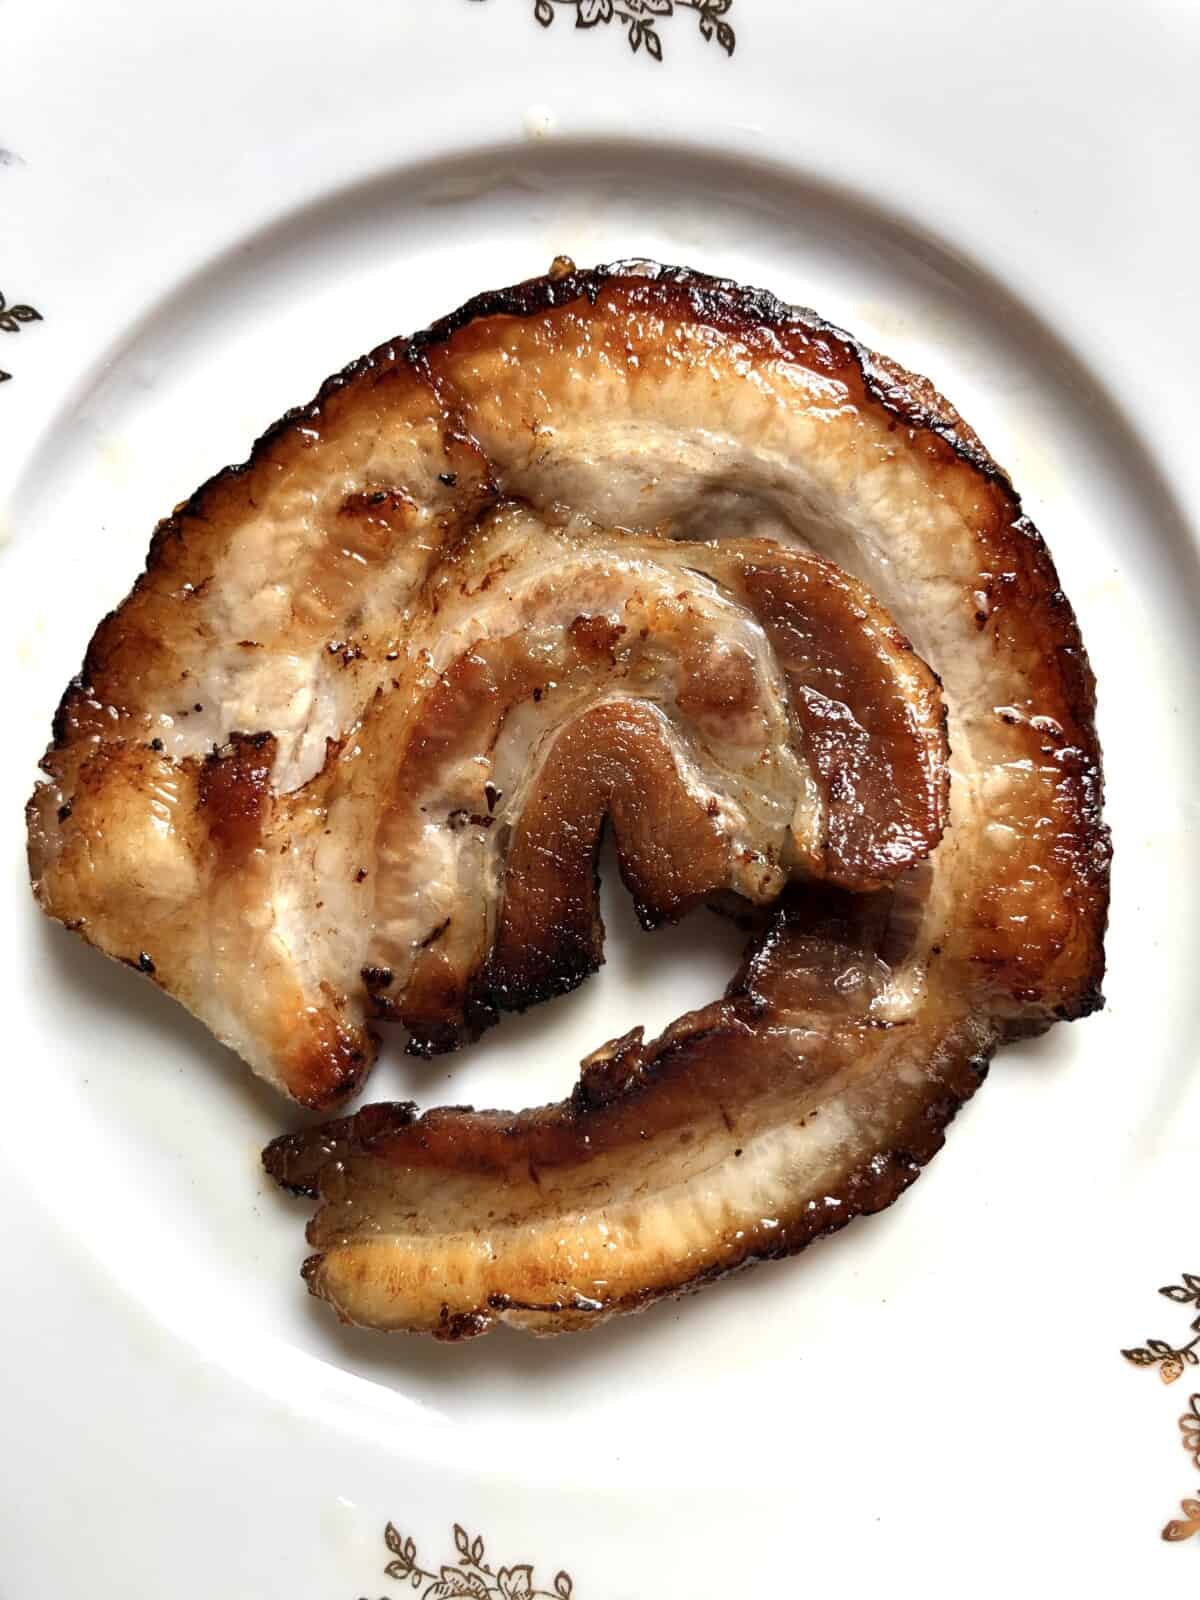 a piece of round beautifully golden brown pan-seared chashu pork on a plate